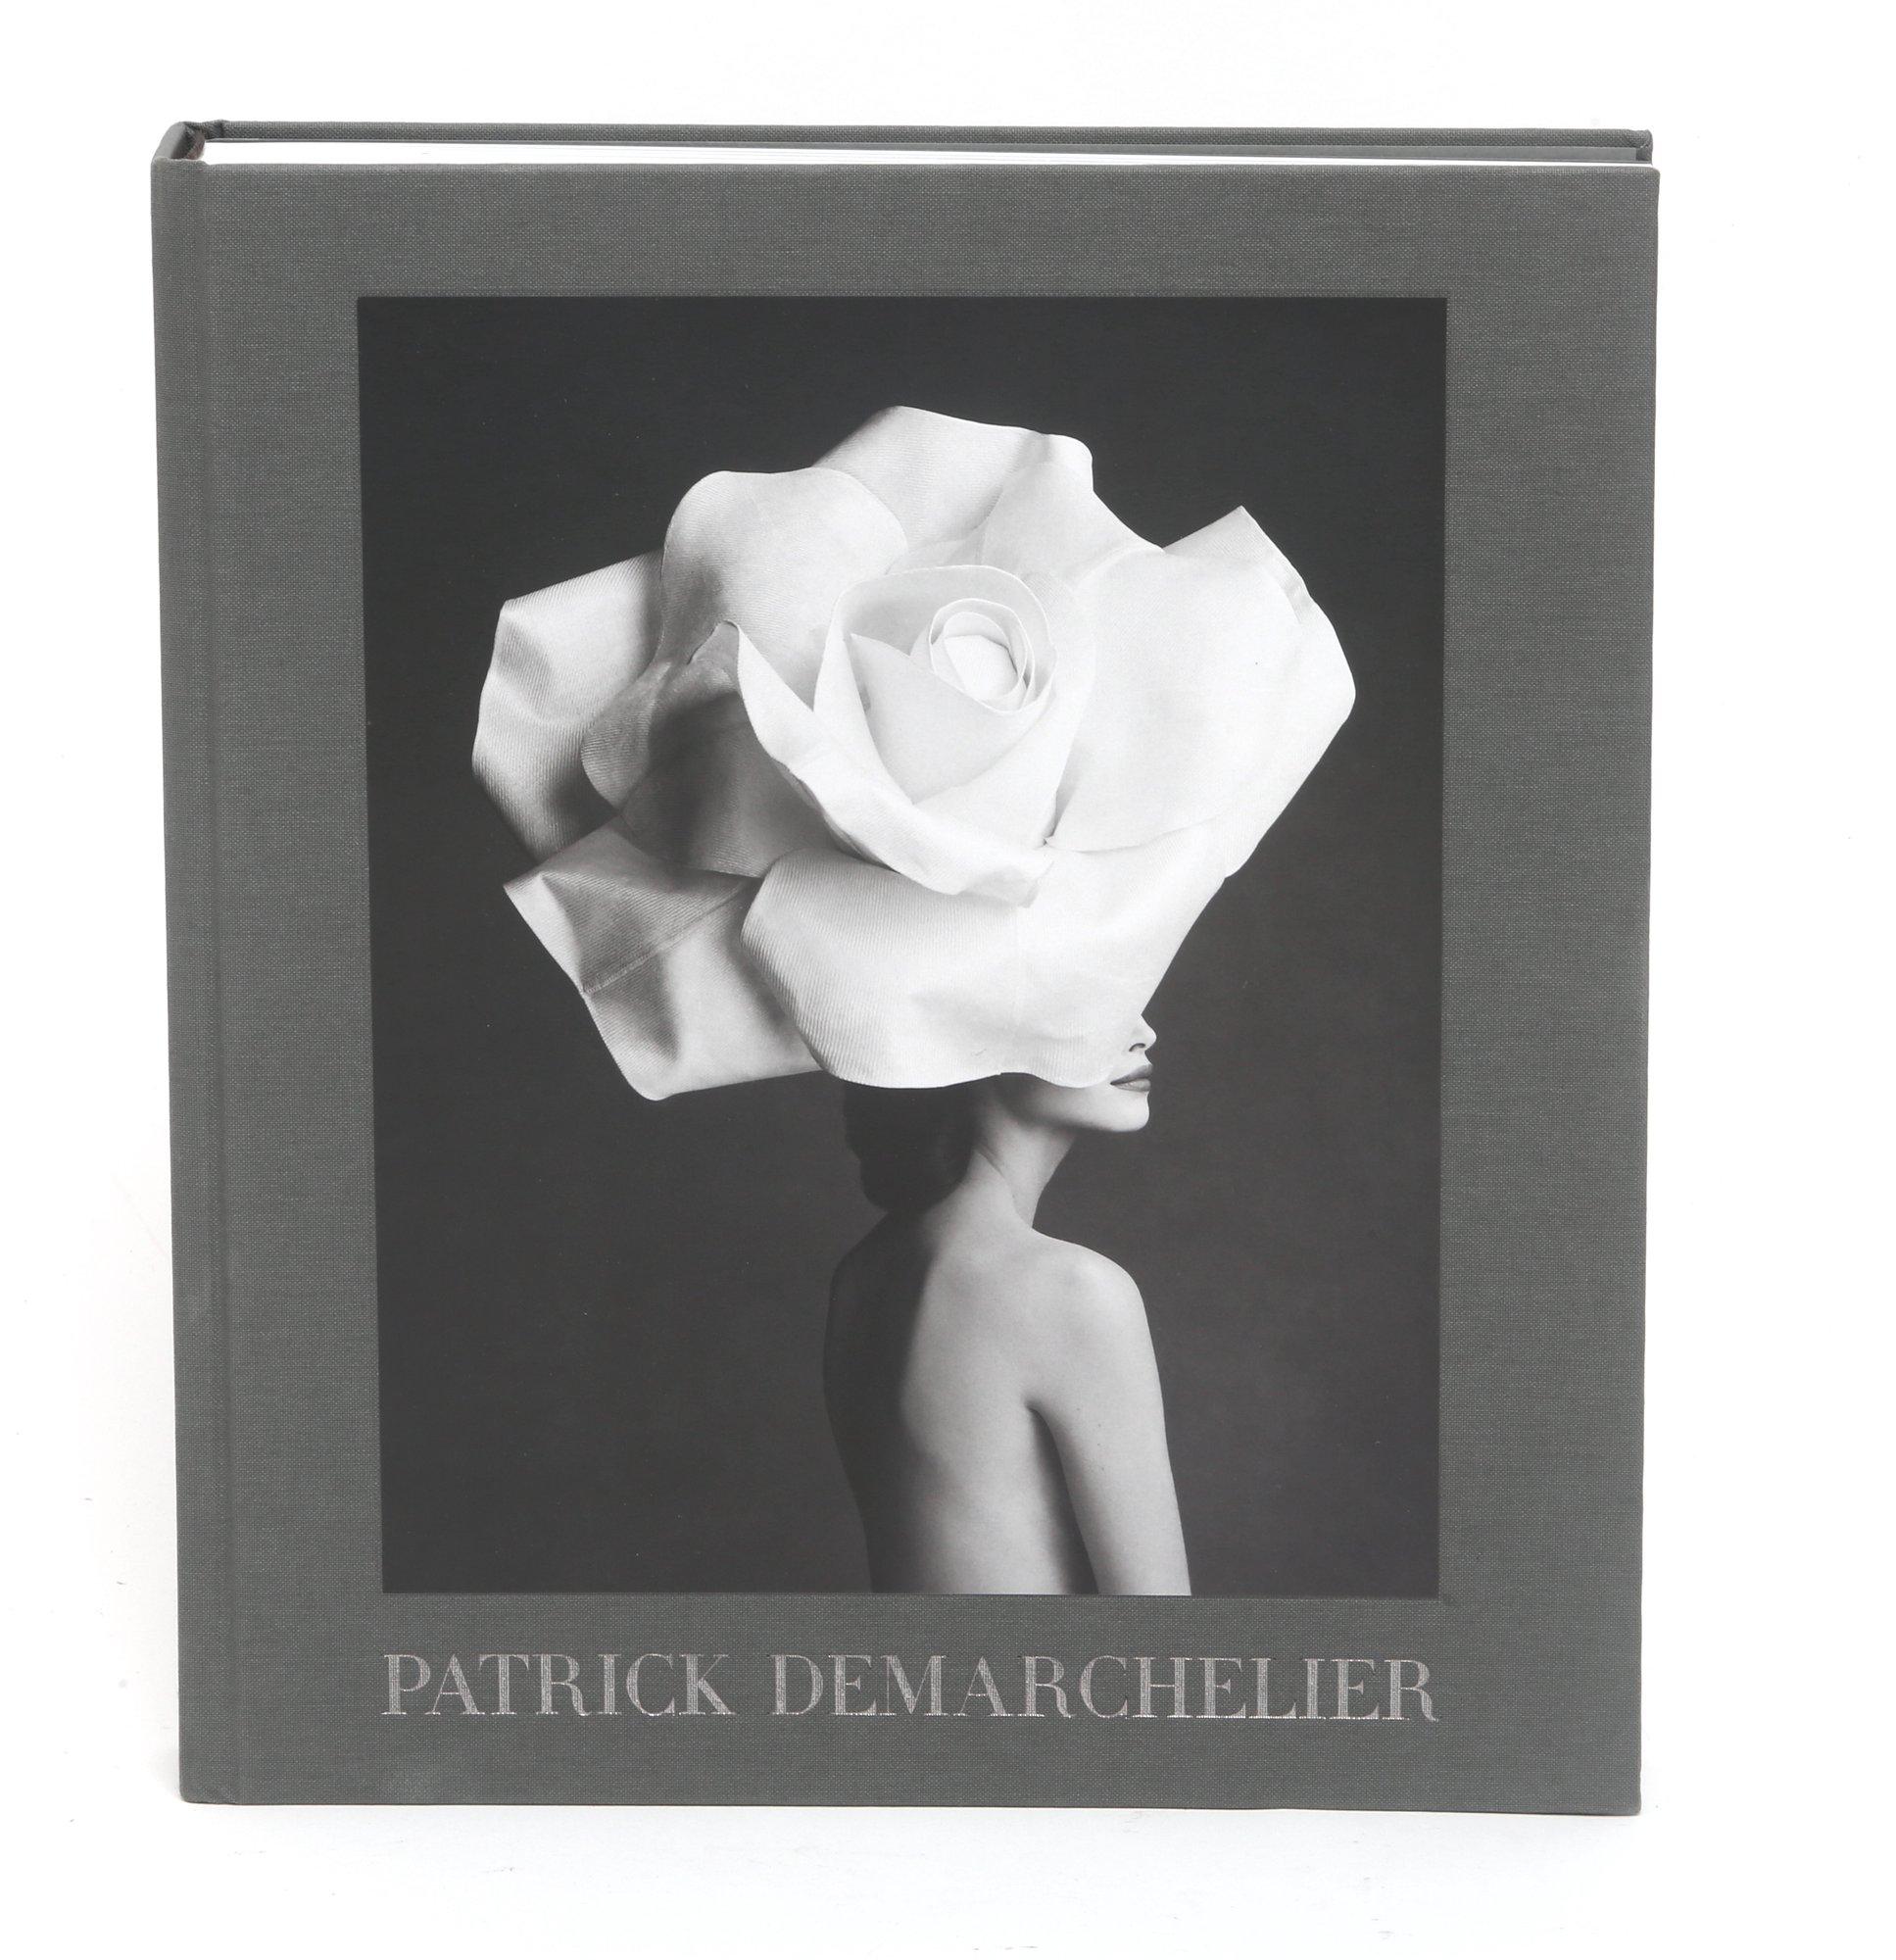 Patrick Demarchelier SIGNED 2008 Ltd Edition 12/150 In Clamshell Box .